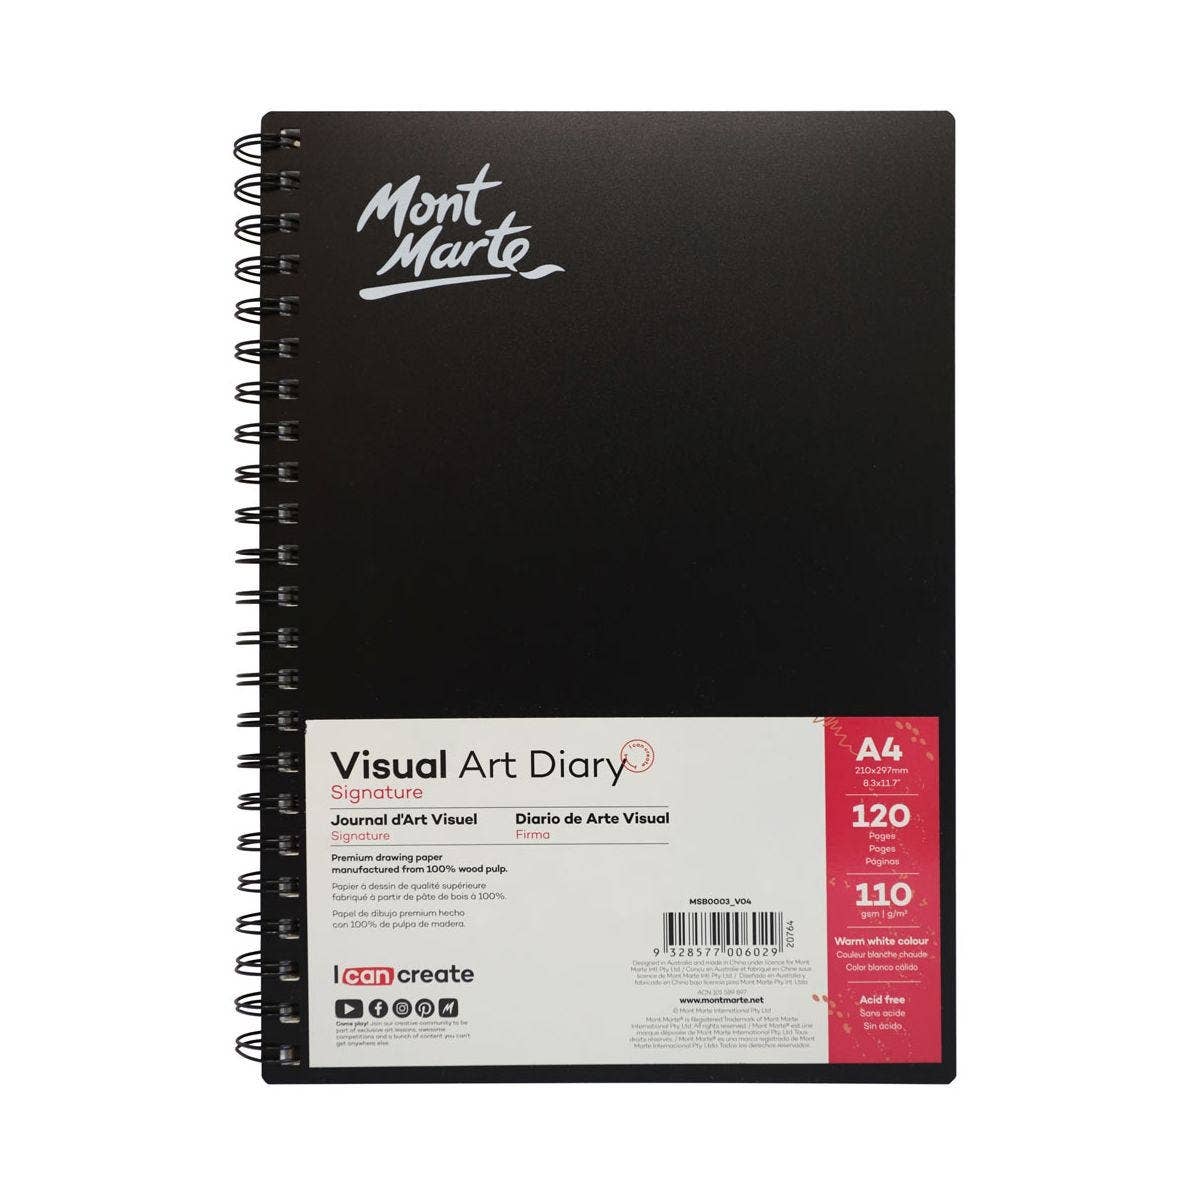 Visual Art Diary Signature 110gsm A4 120 Page